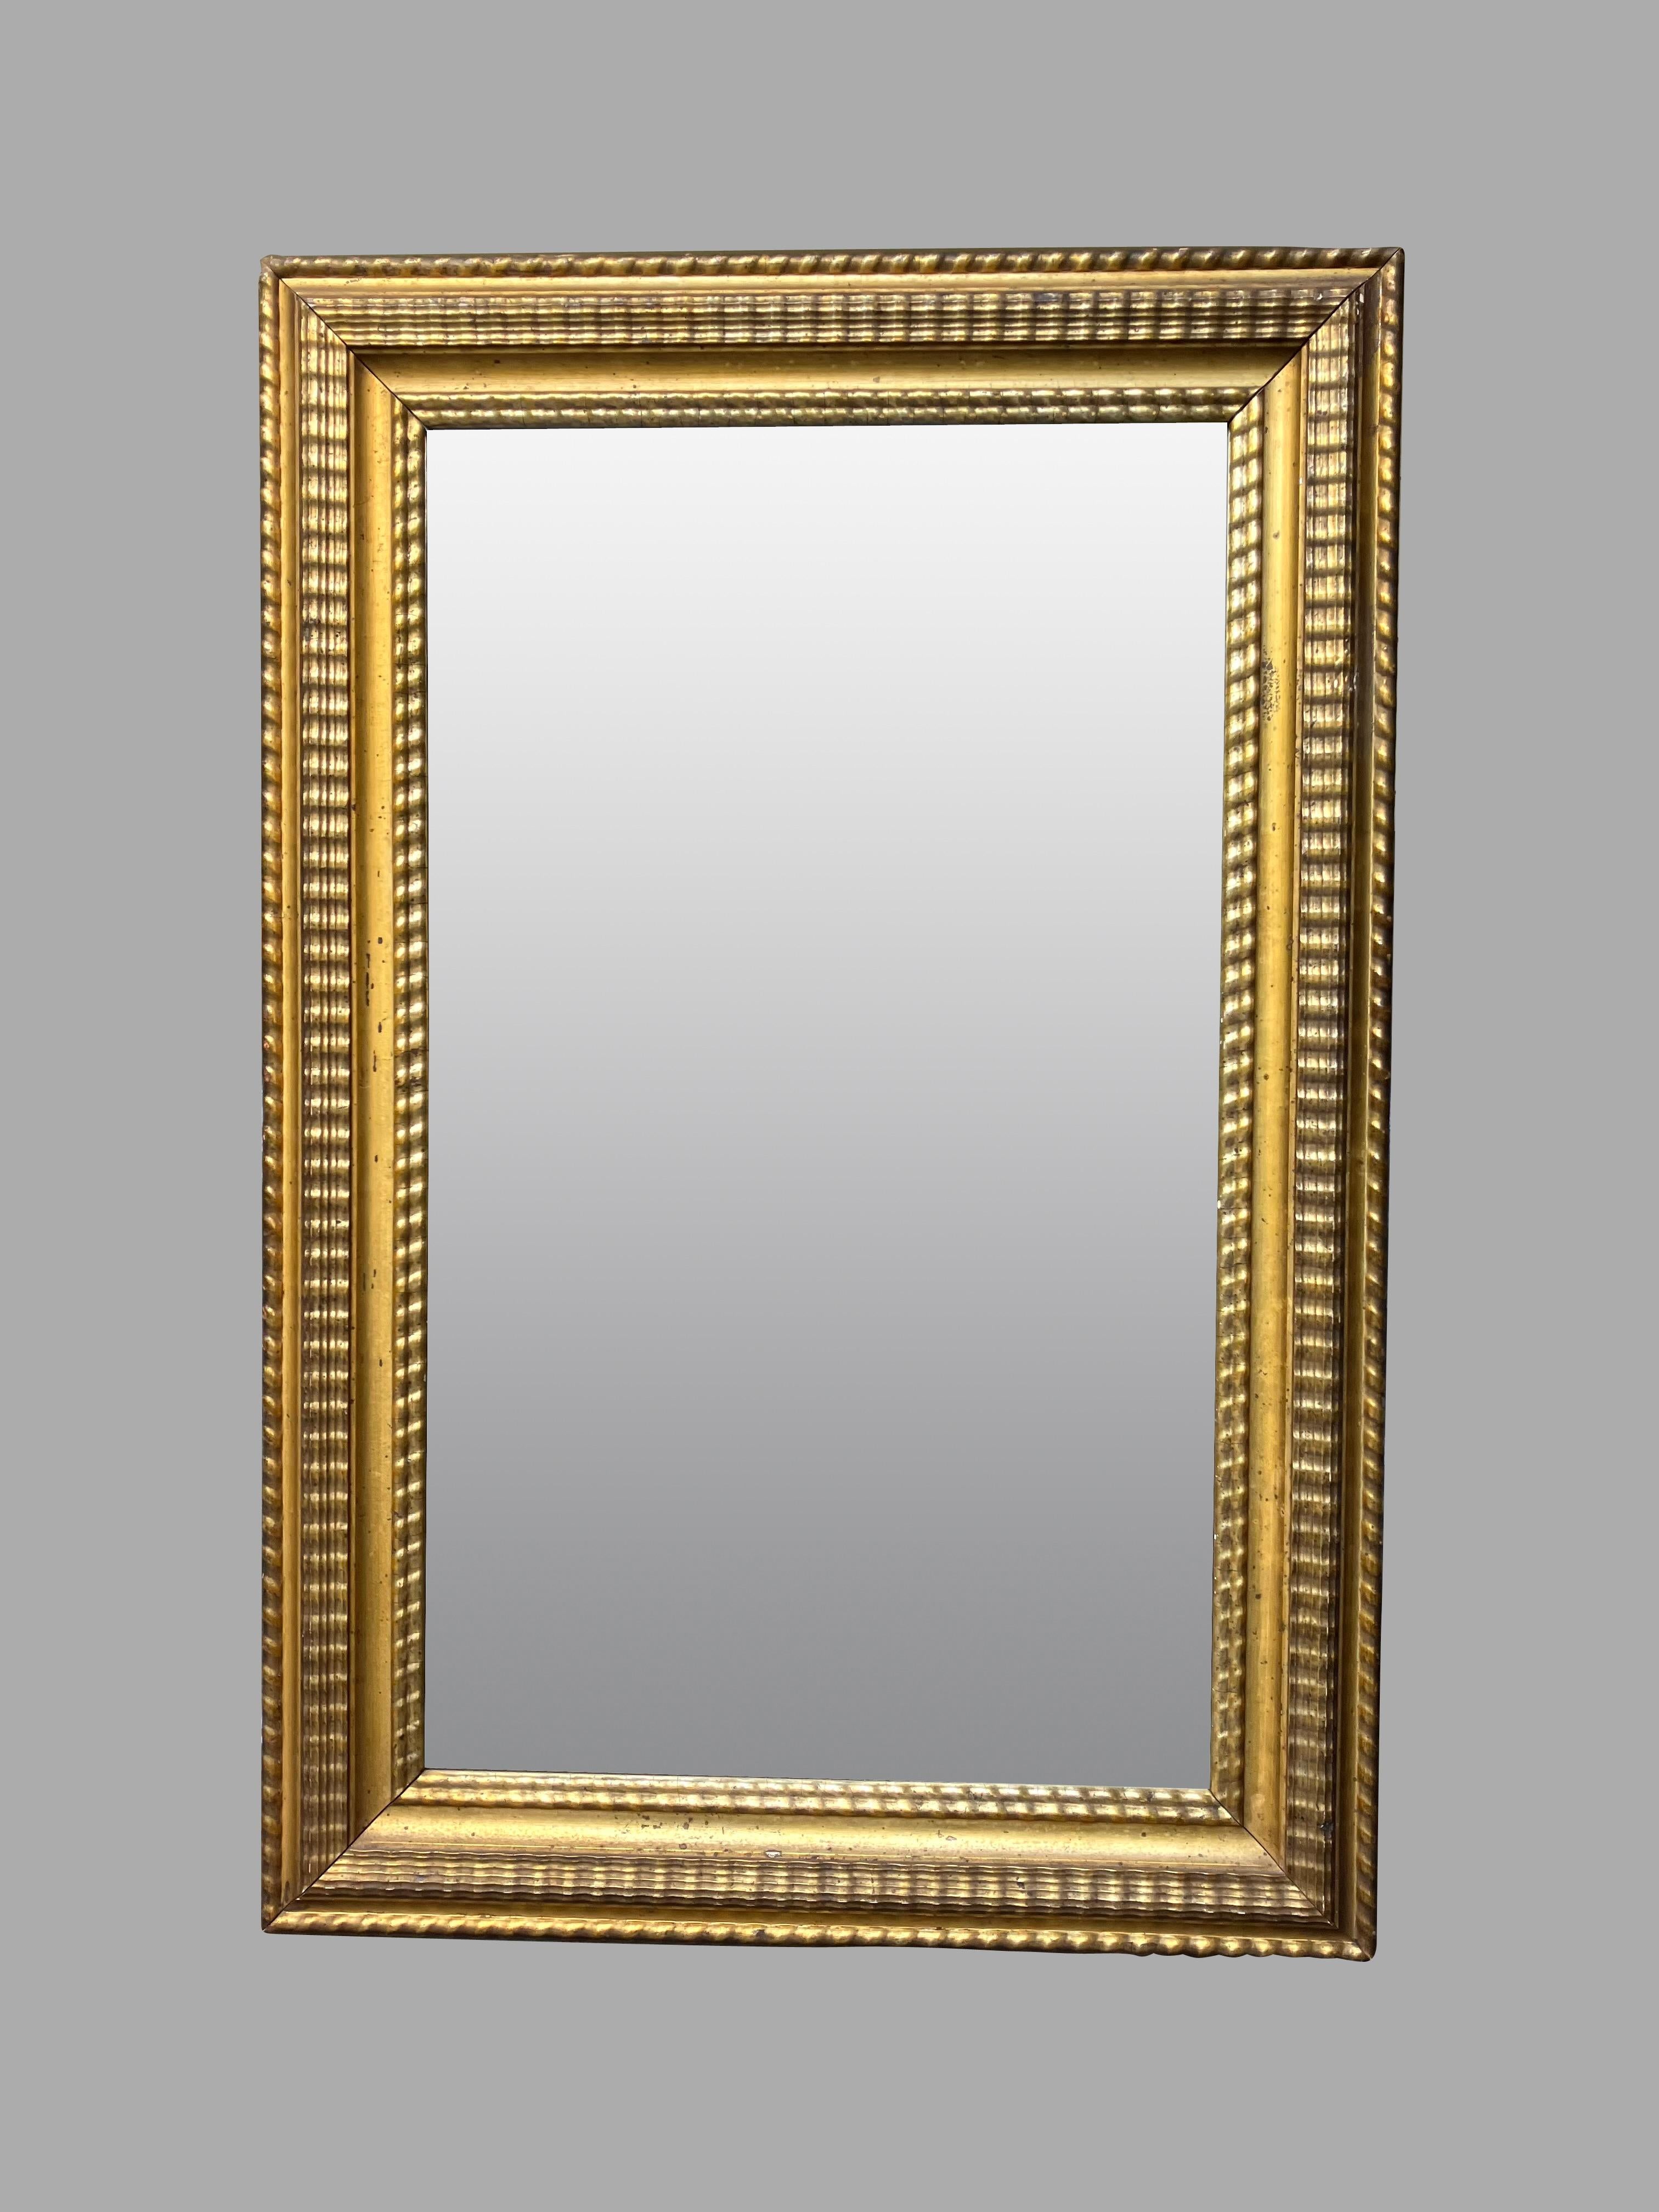 Victorian American Nineteenth Century Giltwood Mirror Retaining Its Original Glass Plate For Sale